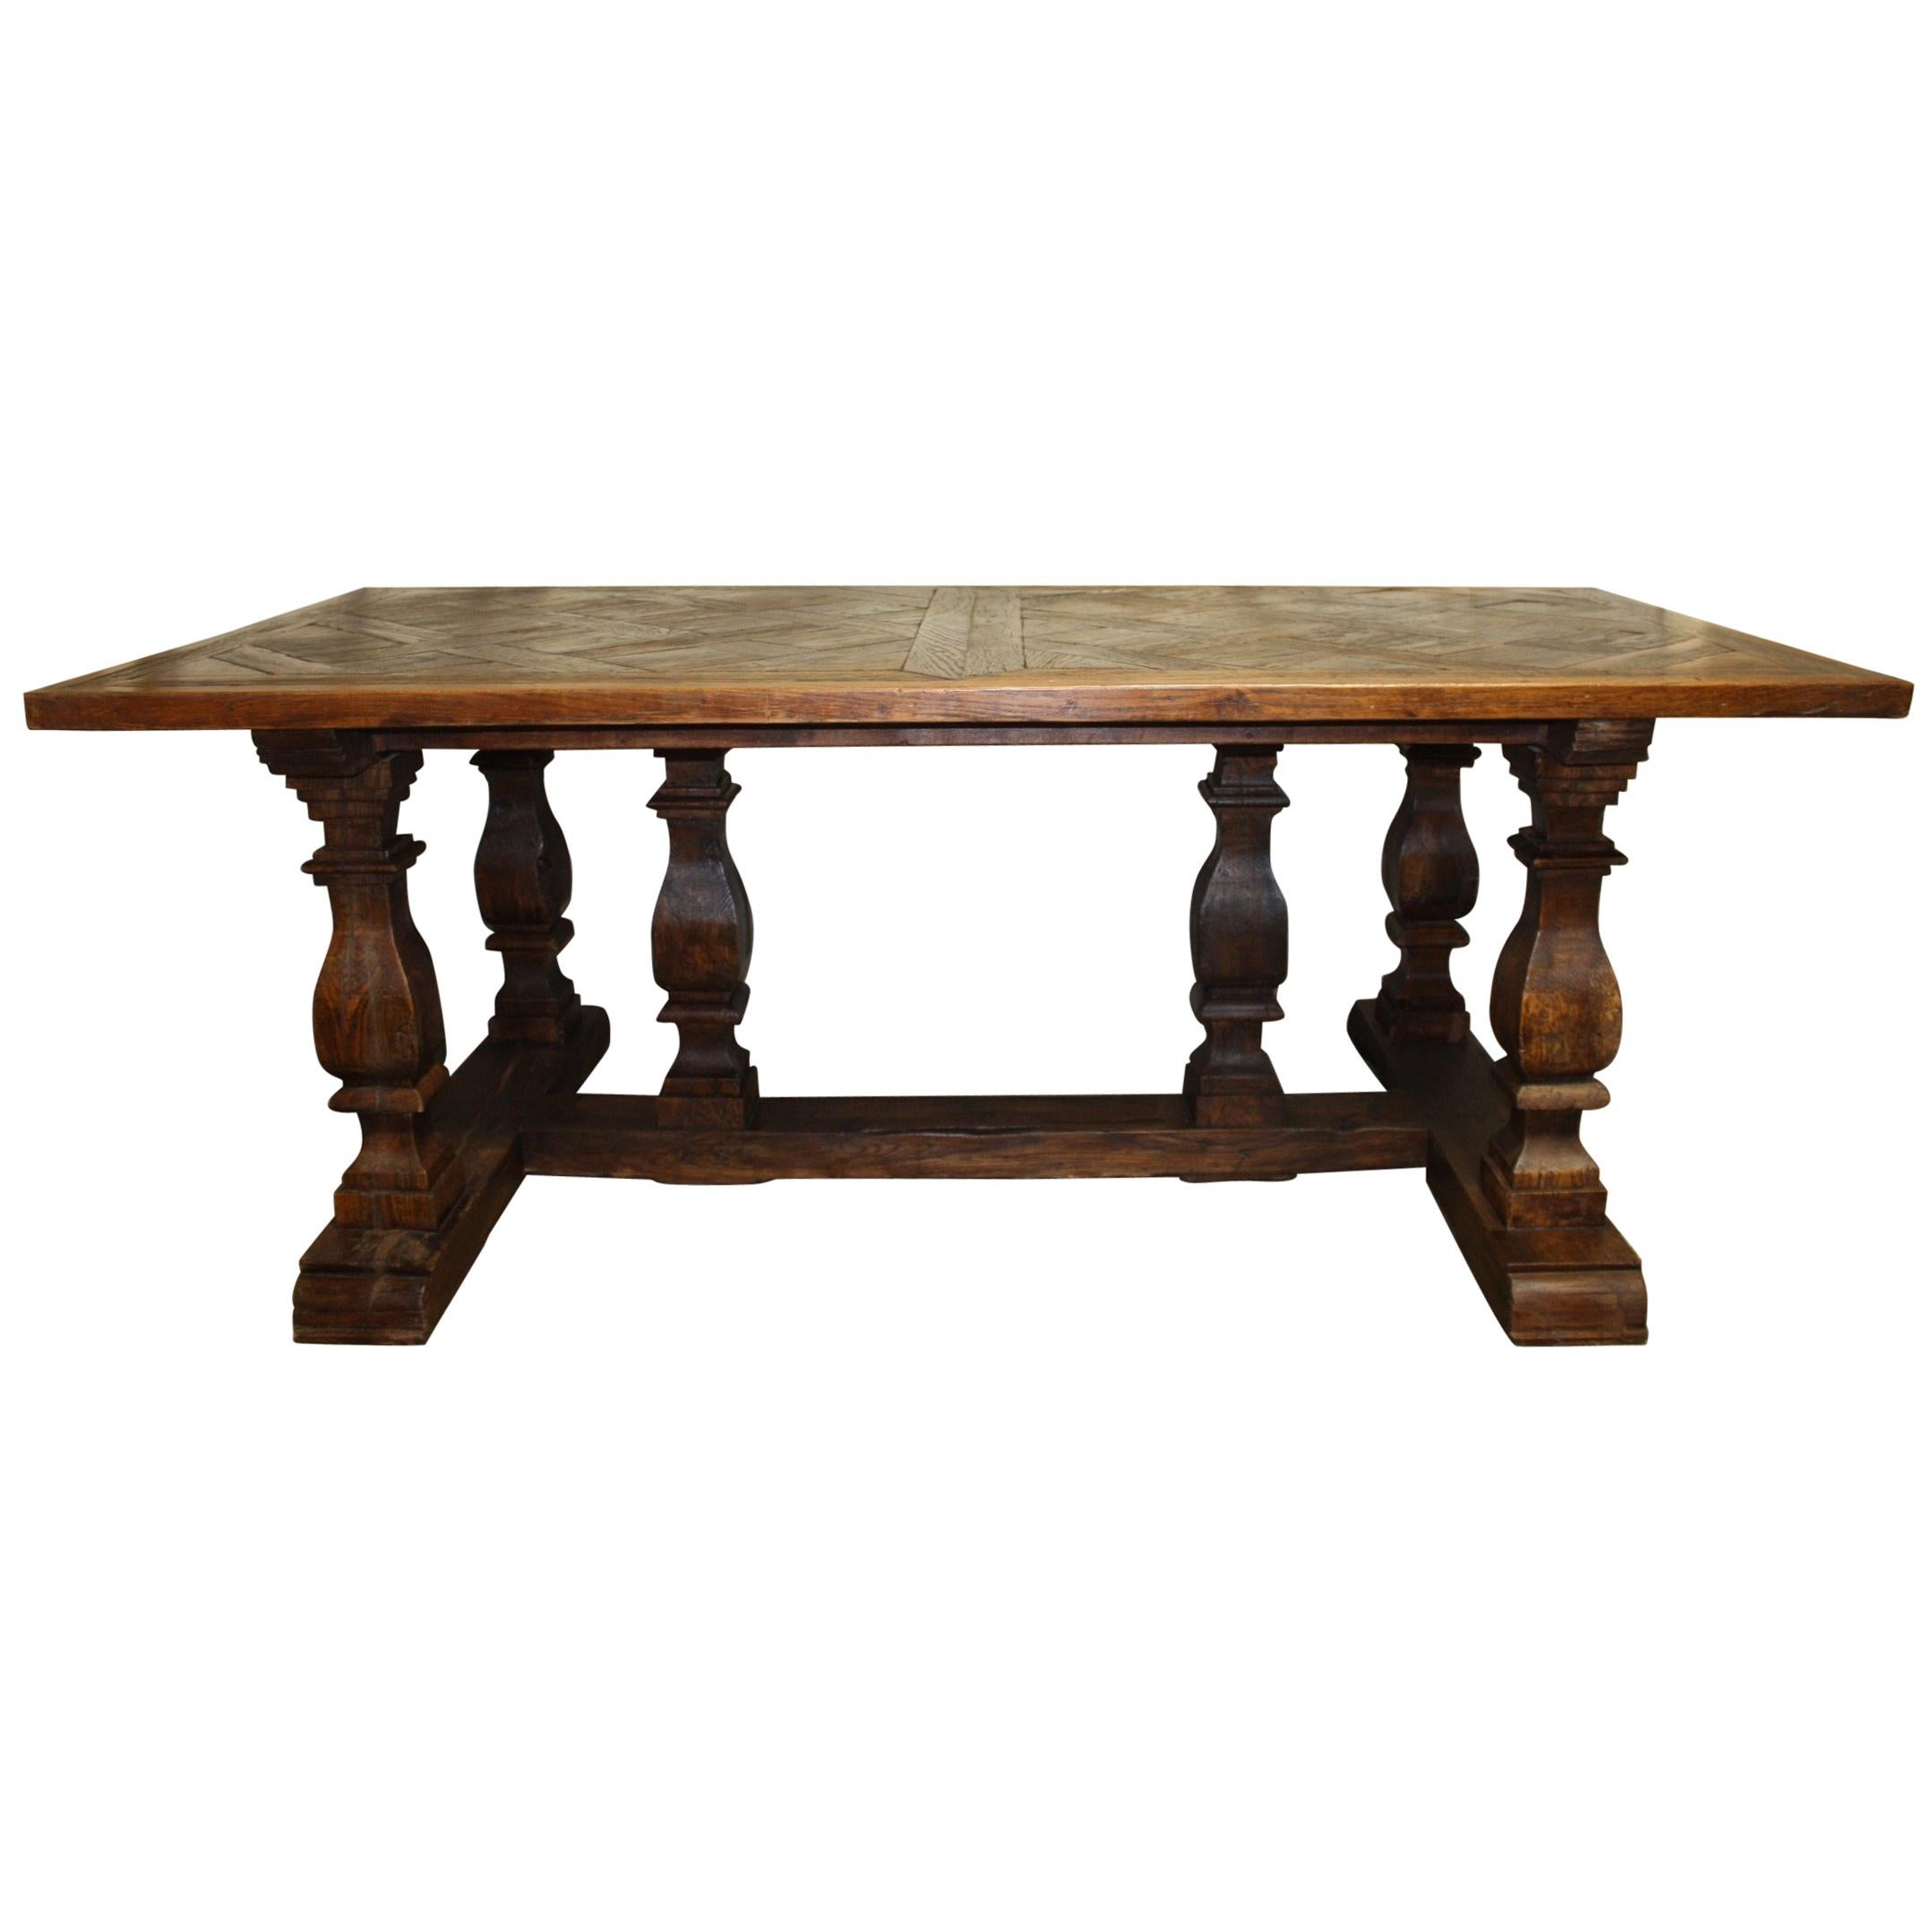 Magnificent 18th Century French Parqueted Table